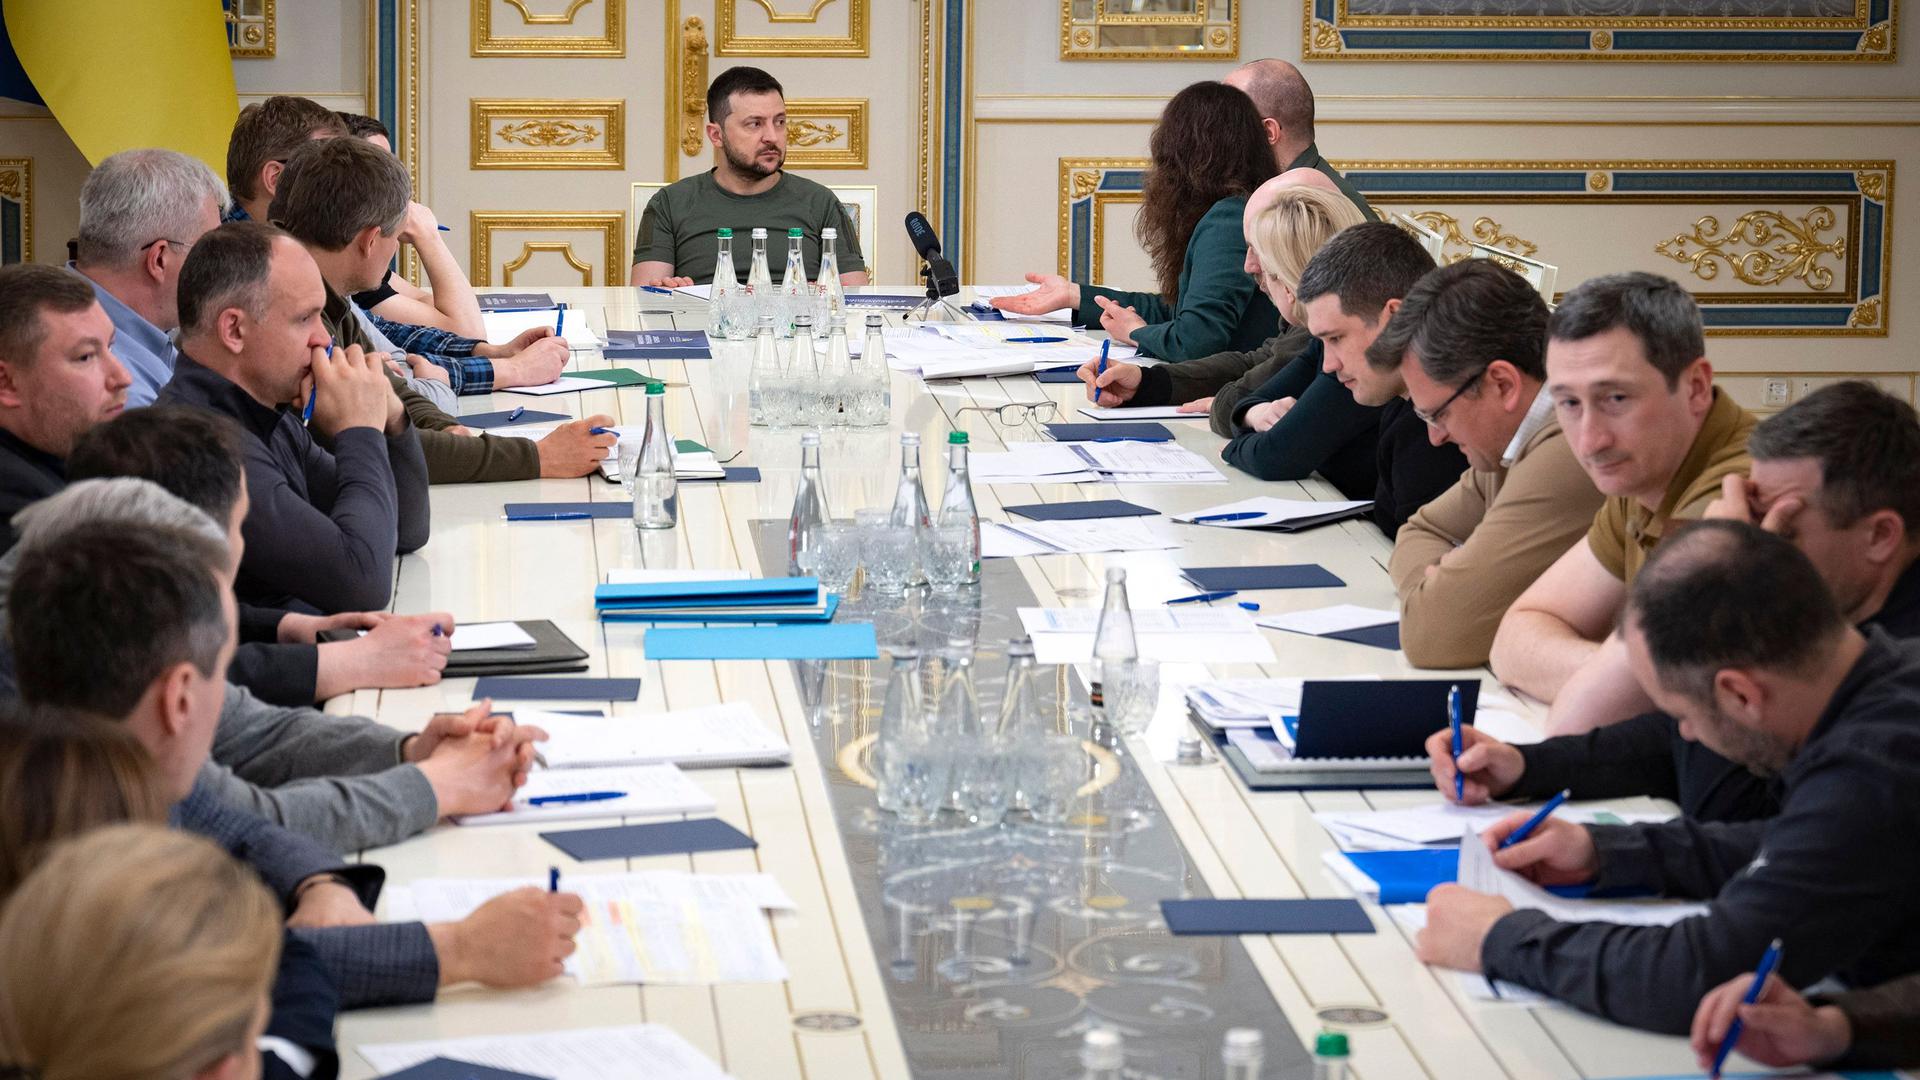 This handout picture taken and released by the Ukrainian Presidential press service on May 27, 2022 shows Ukrainian President Volodymyr Zelensky (C) chairing a meeting with members of the Ukrainian government in Kyiv